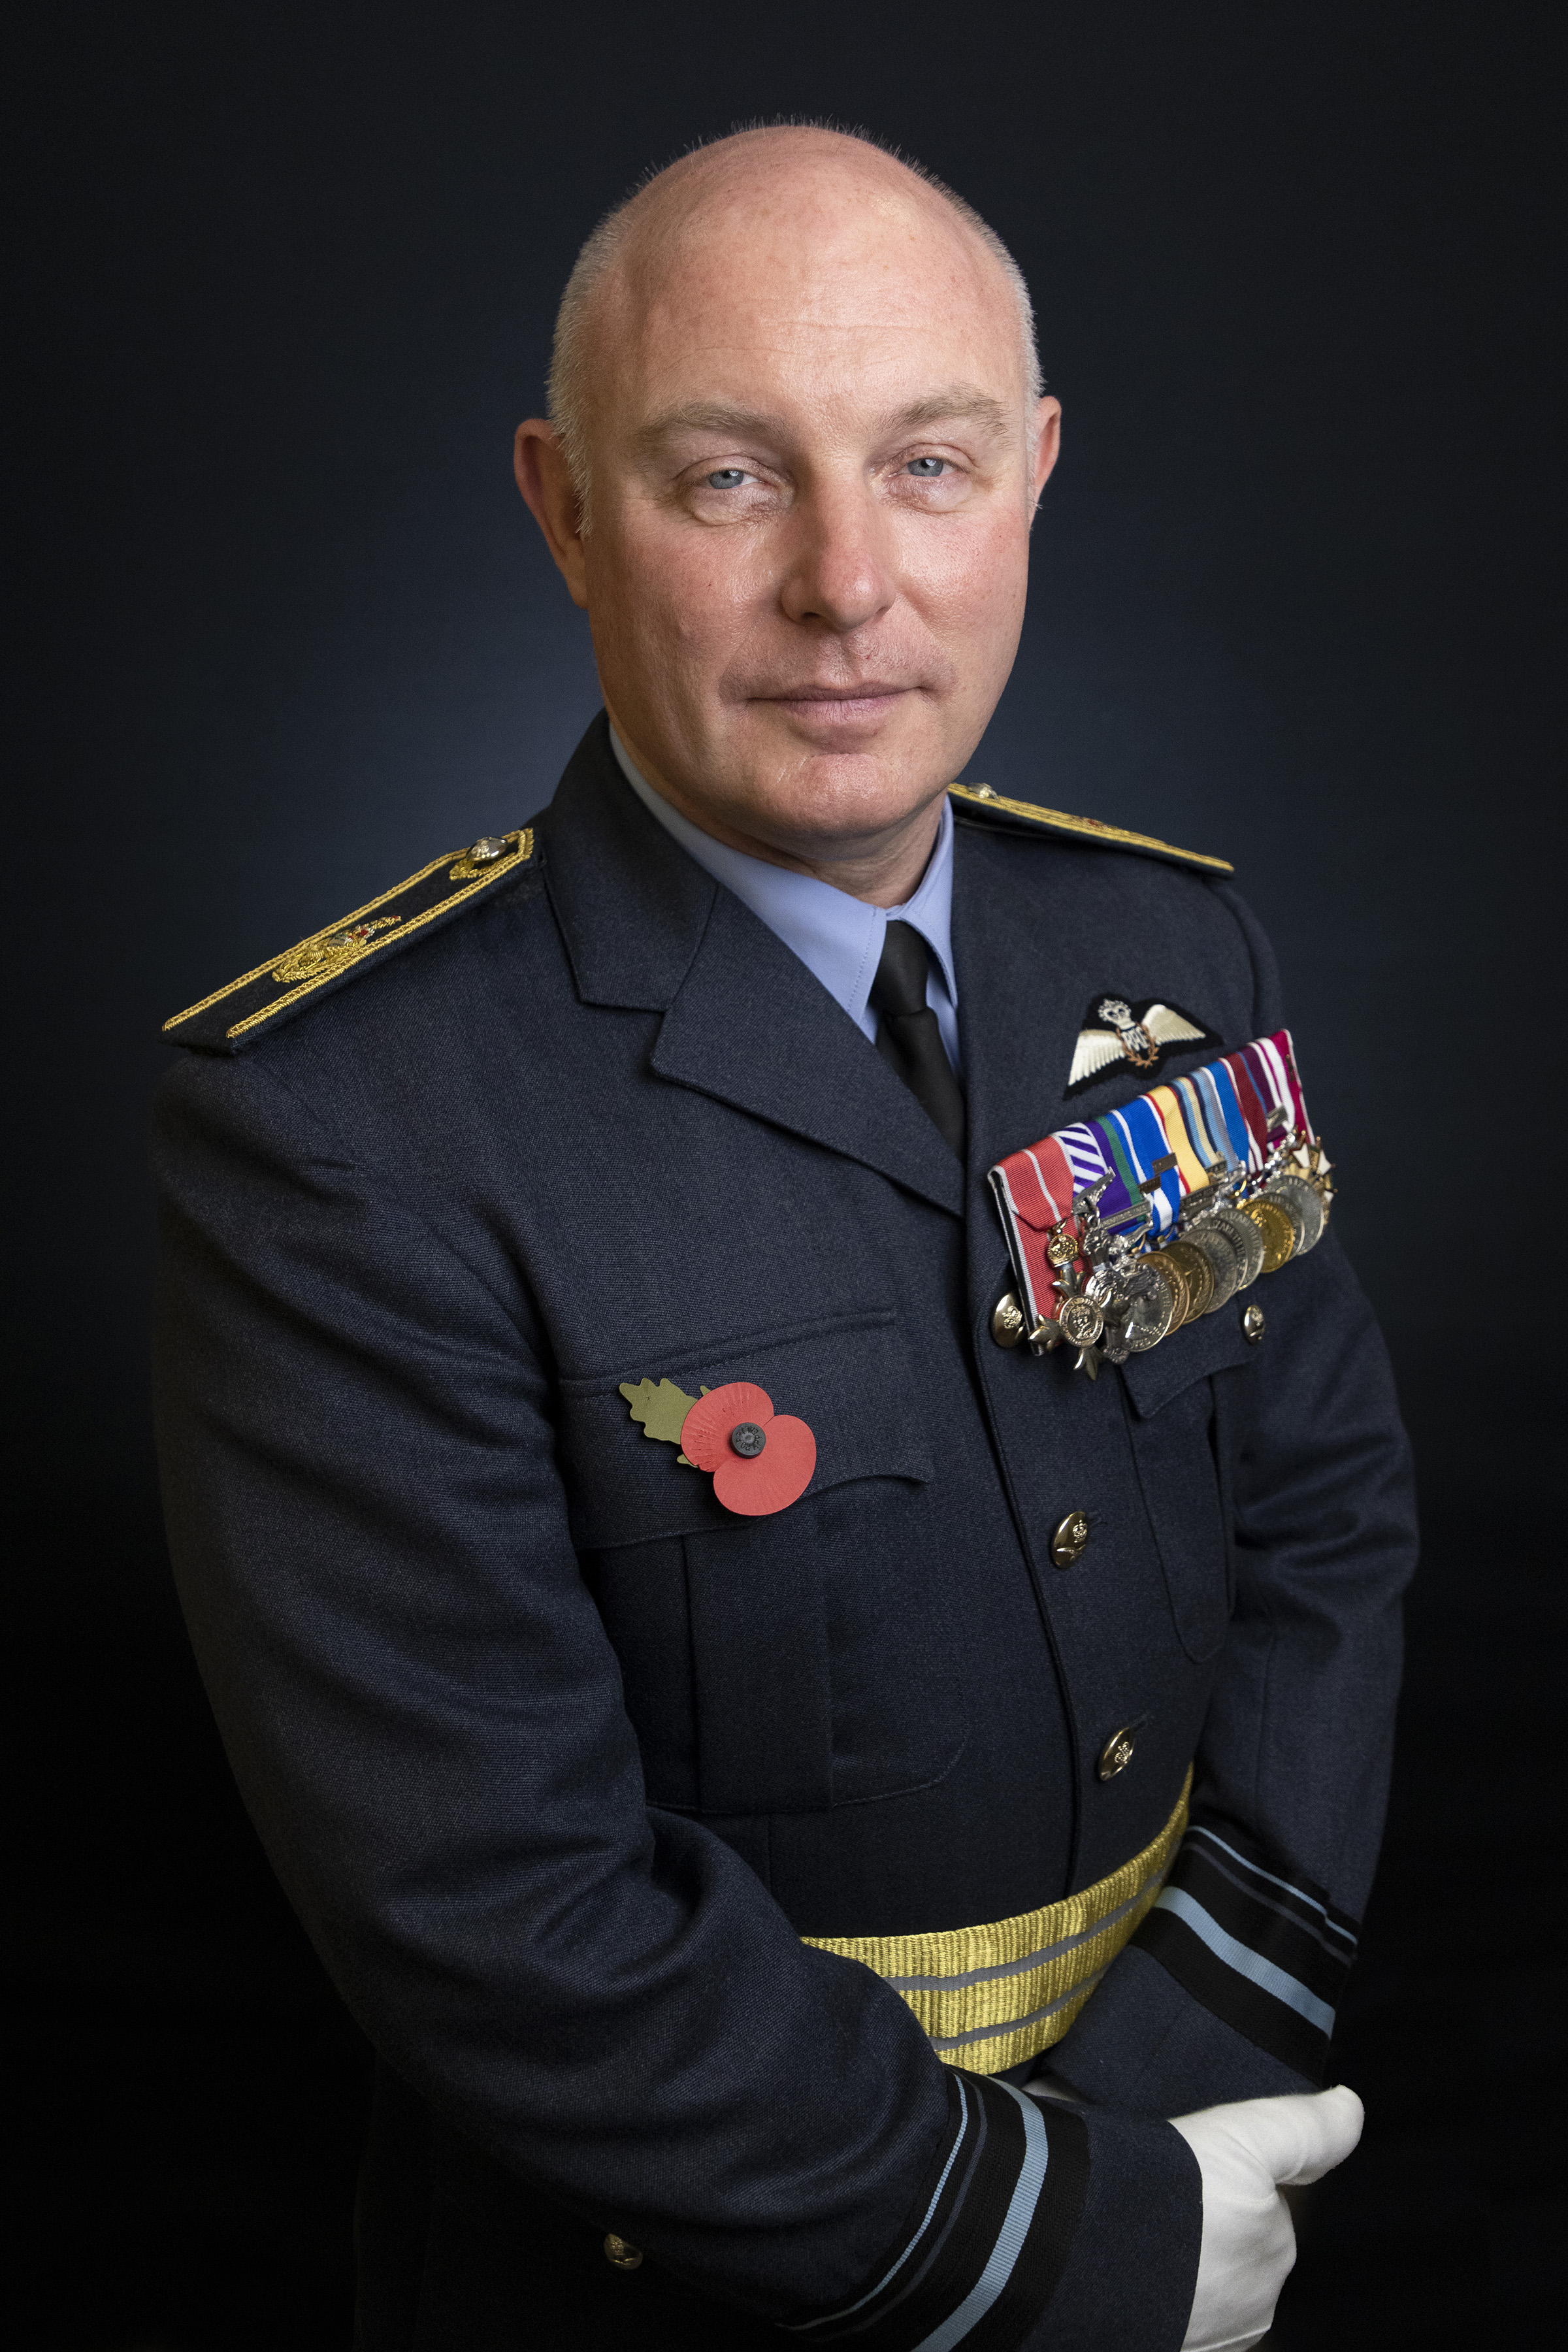 Portrait of Air Vice-Marshal Smyth wearing poppy and medal panel.